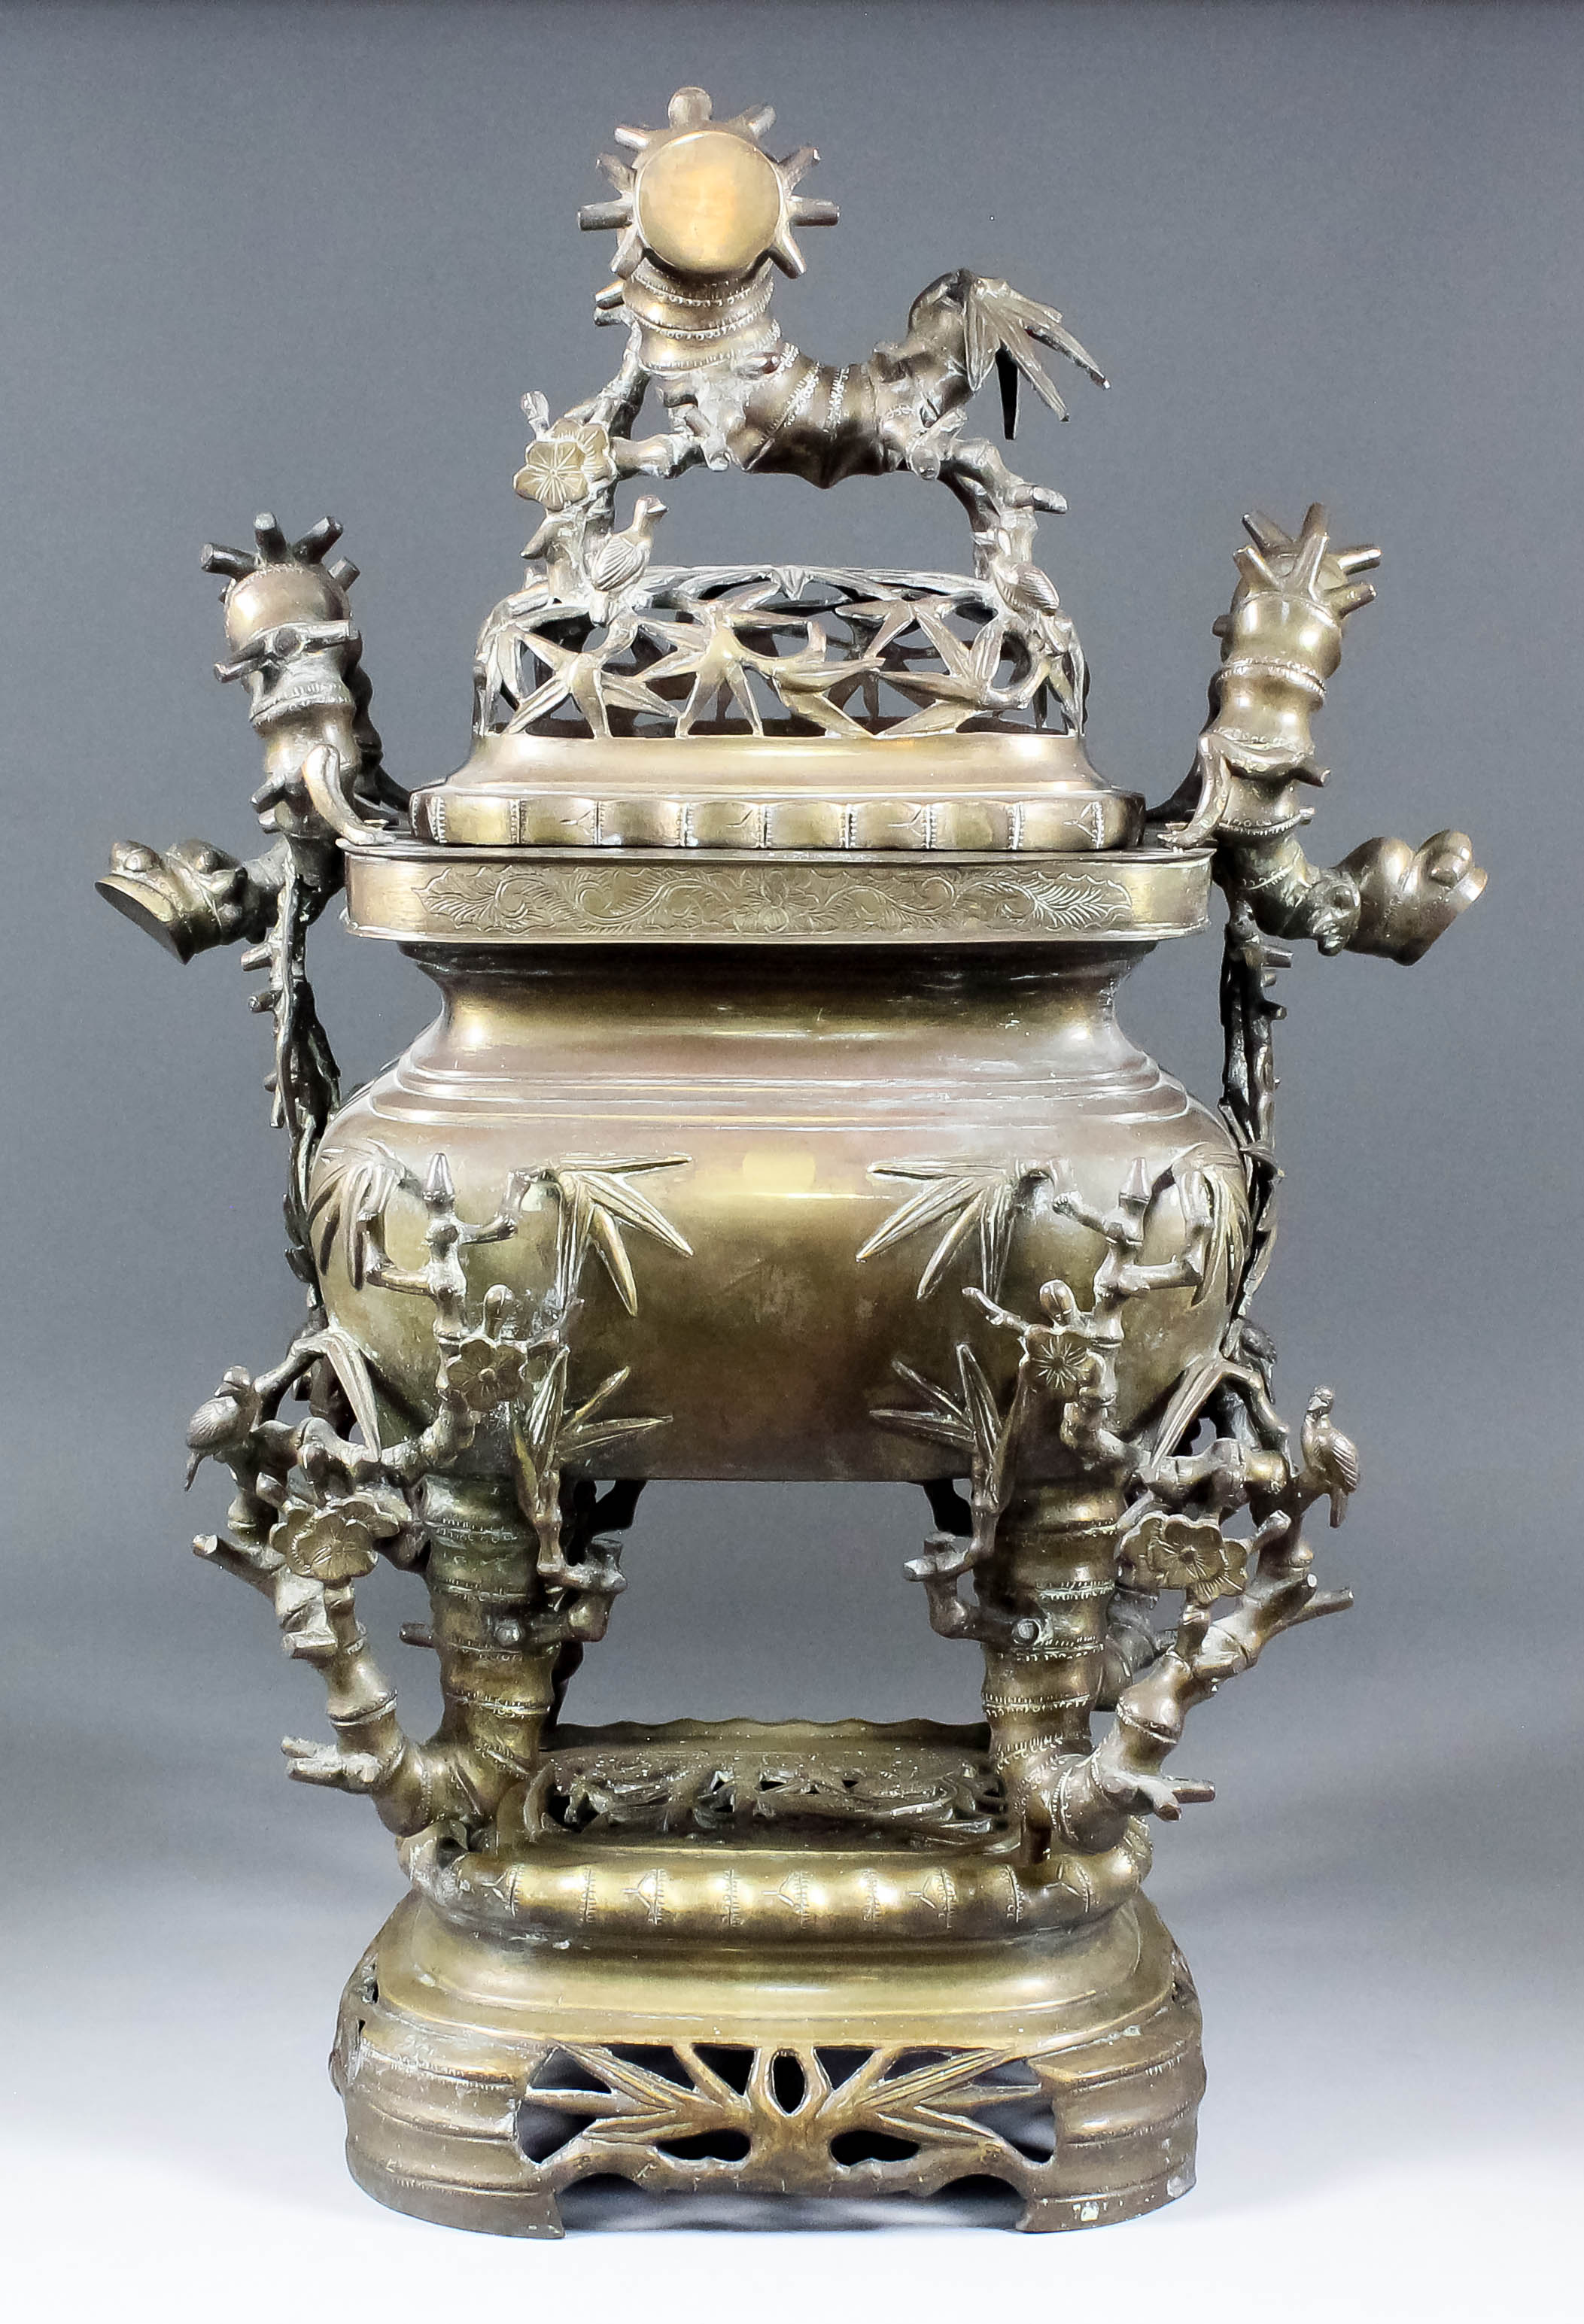 A Chinese cast brass rectangular two-handled koro, cover and stand, the pierced cover with dragon